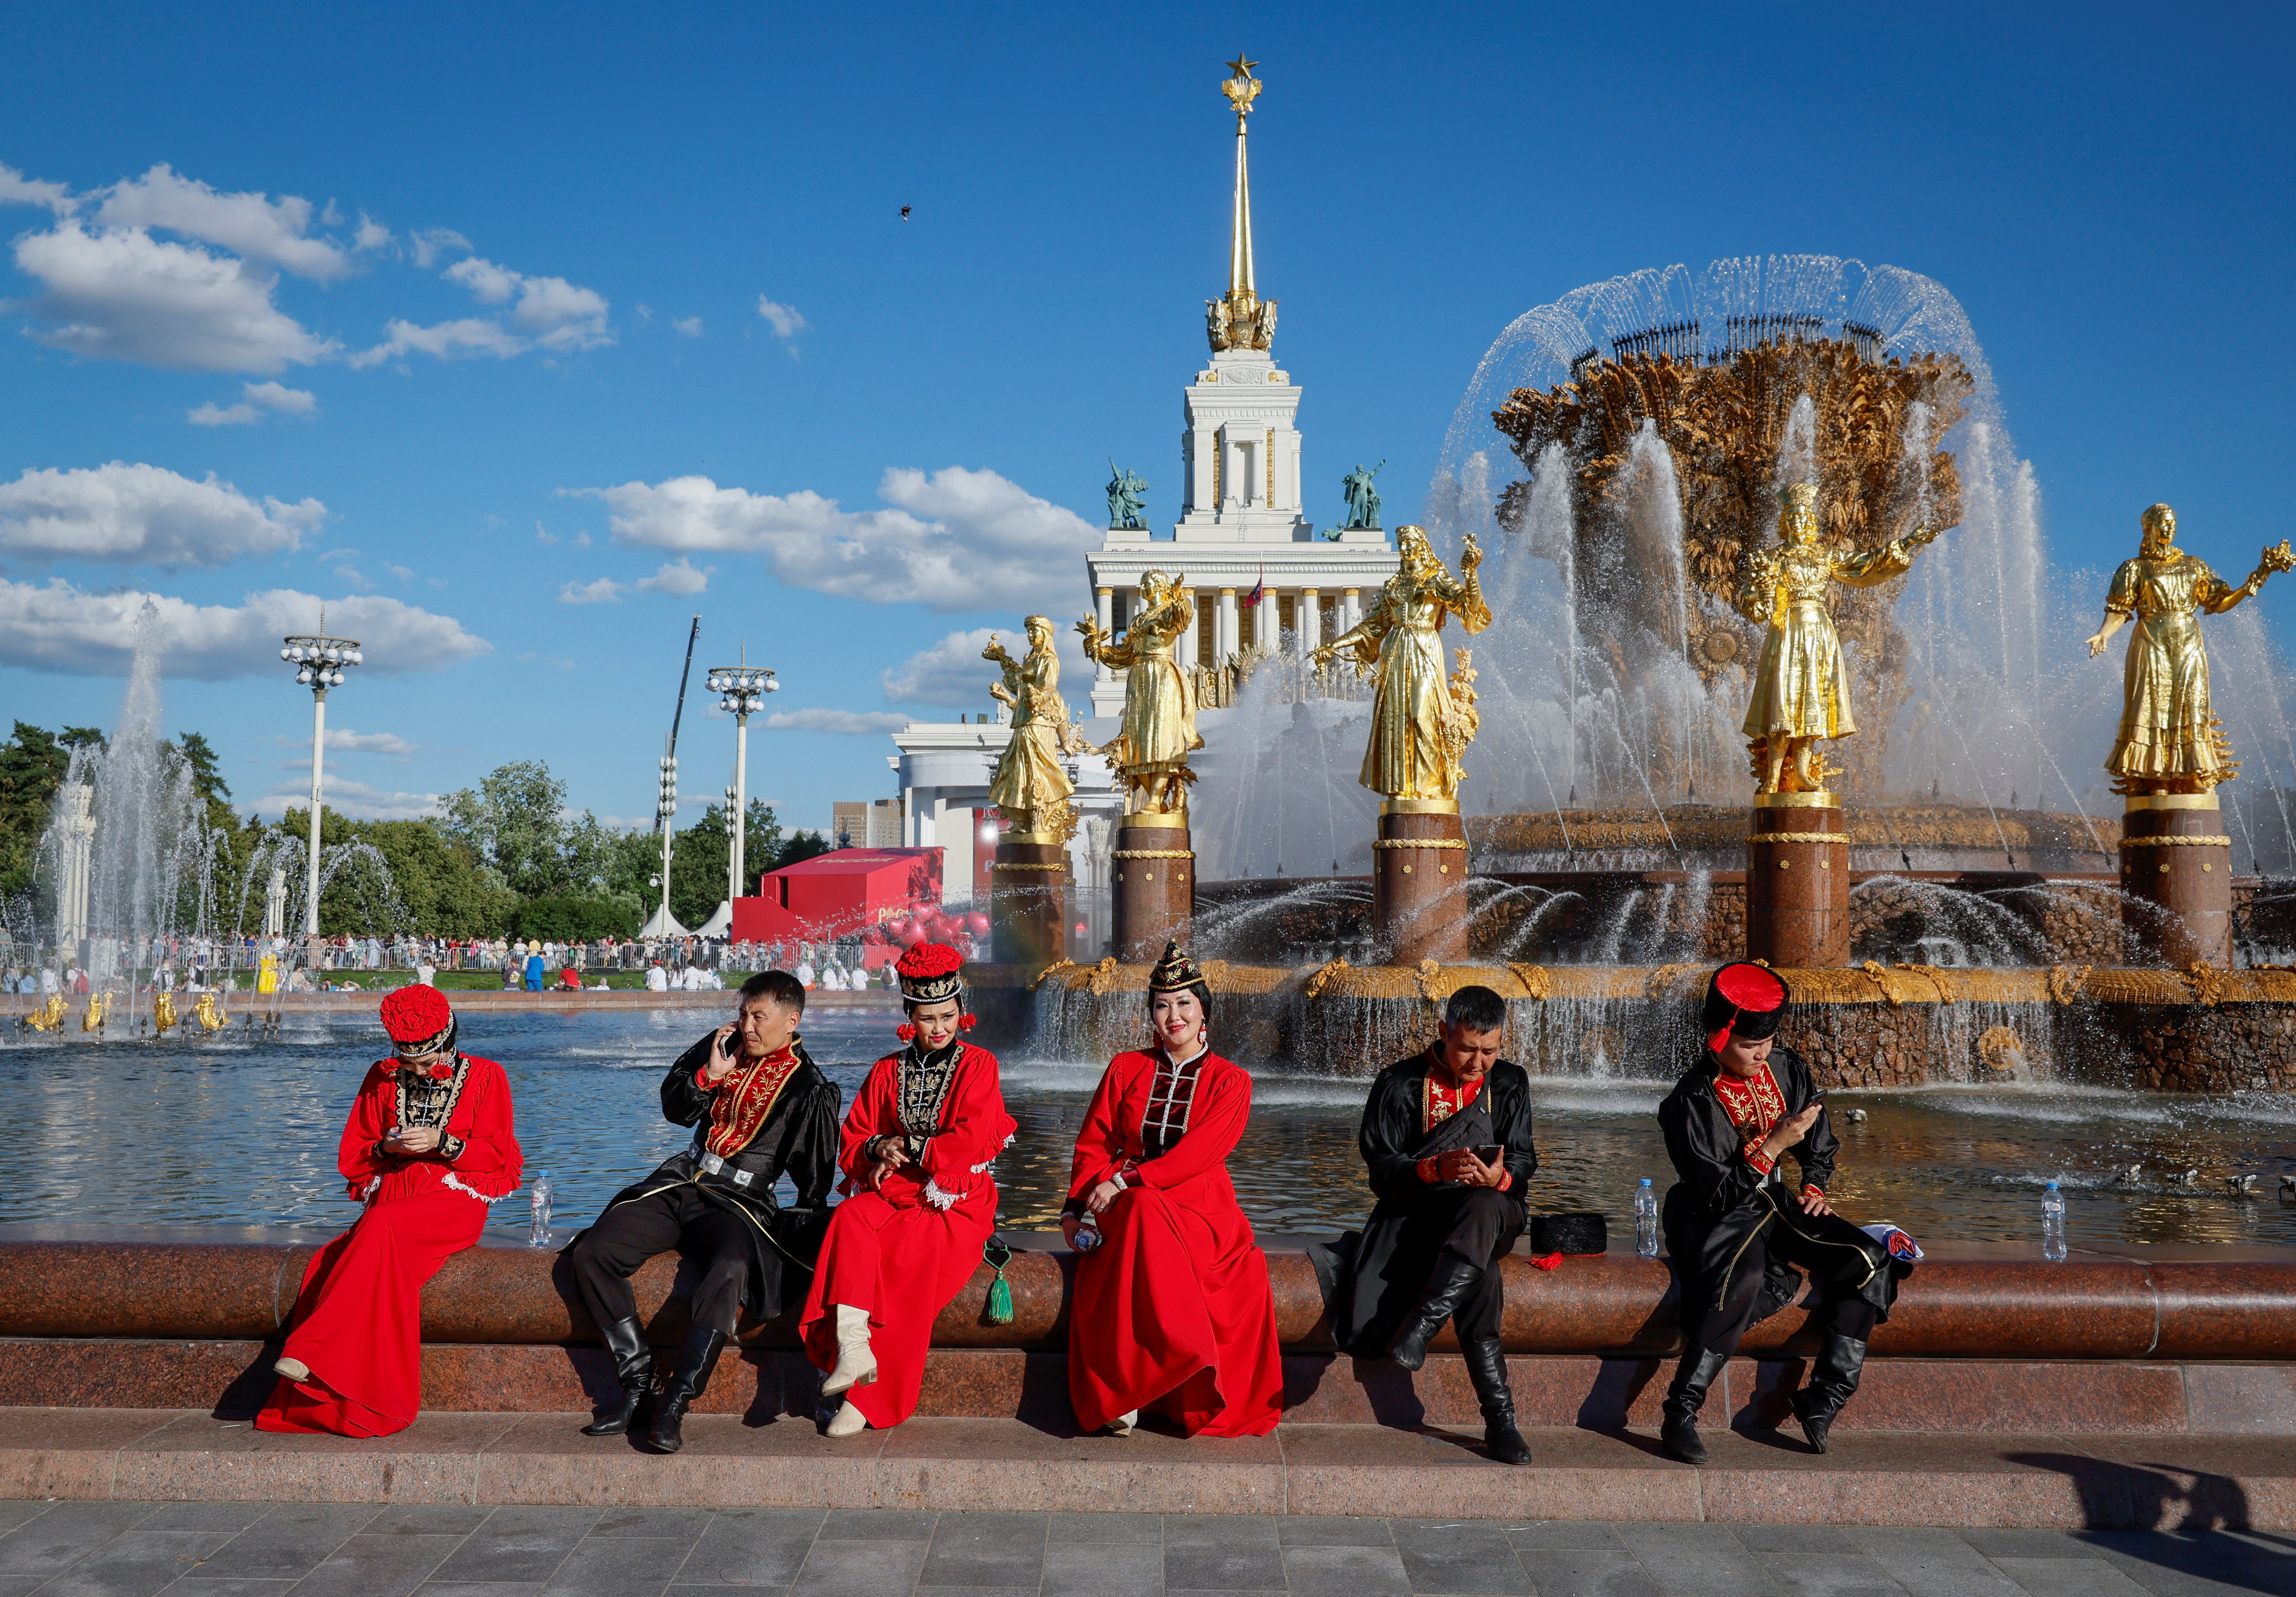 Artists from the Republic of Kalmykia attend the closing concert of the "Russia" International Exhibition and Forum at the Exhibition of Achievements of National Economy (VDNKh) in Moscow, Russia July 6, 2024